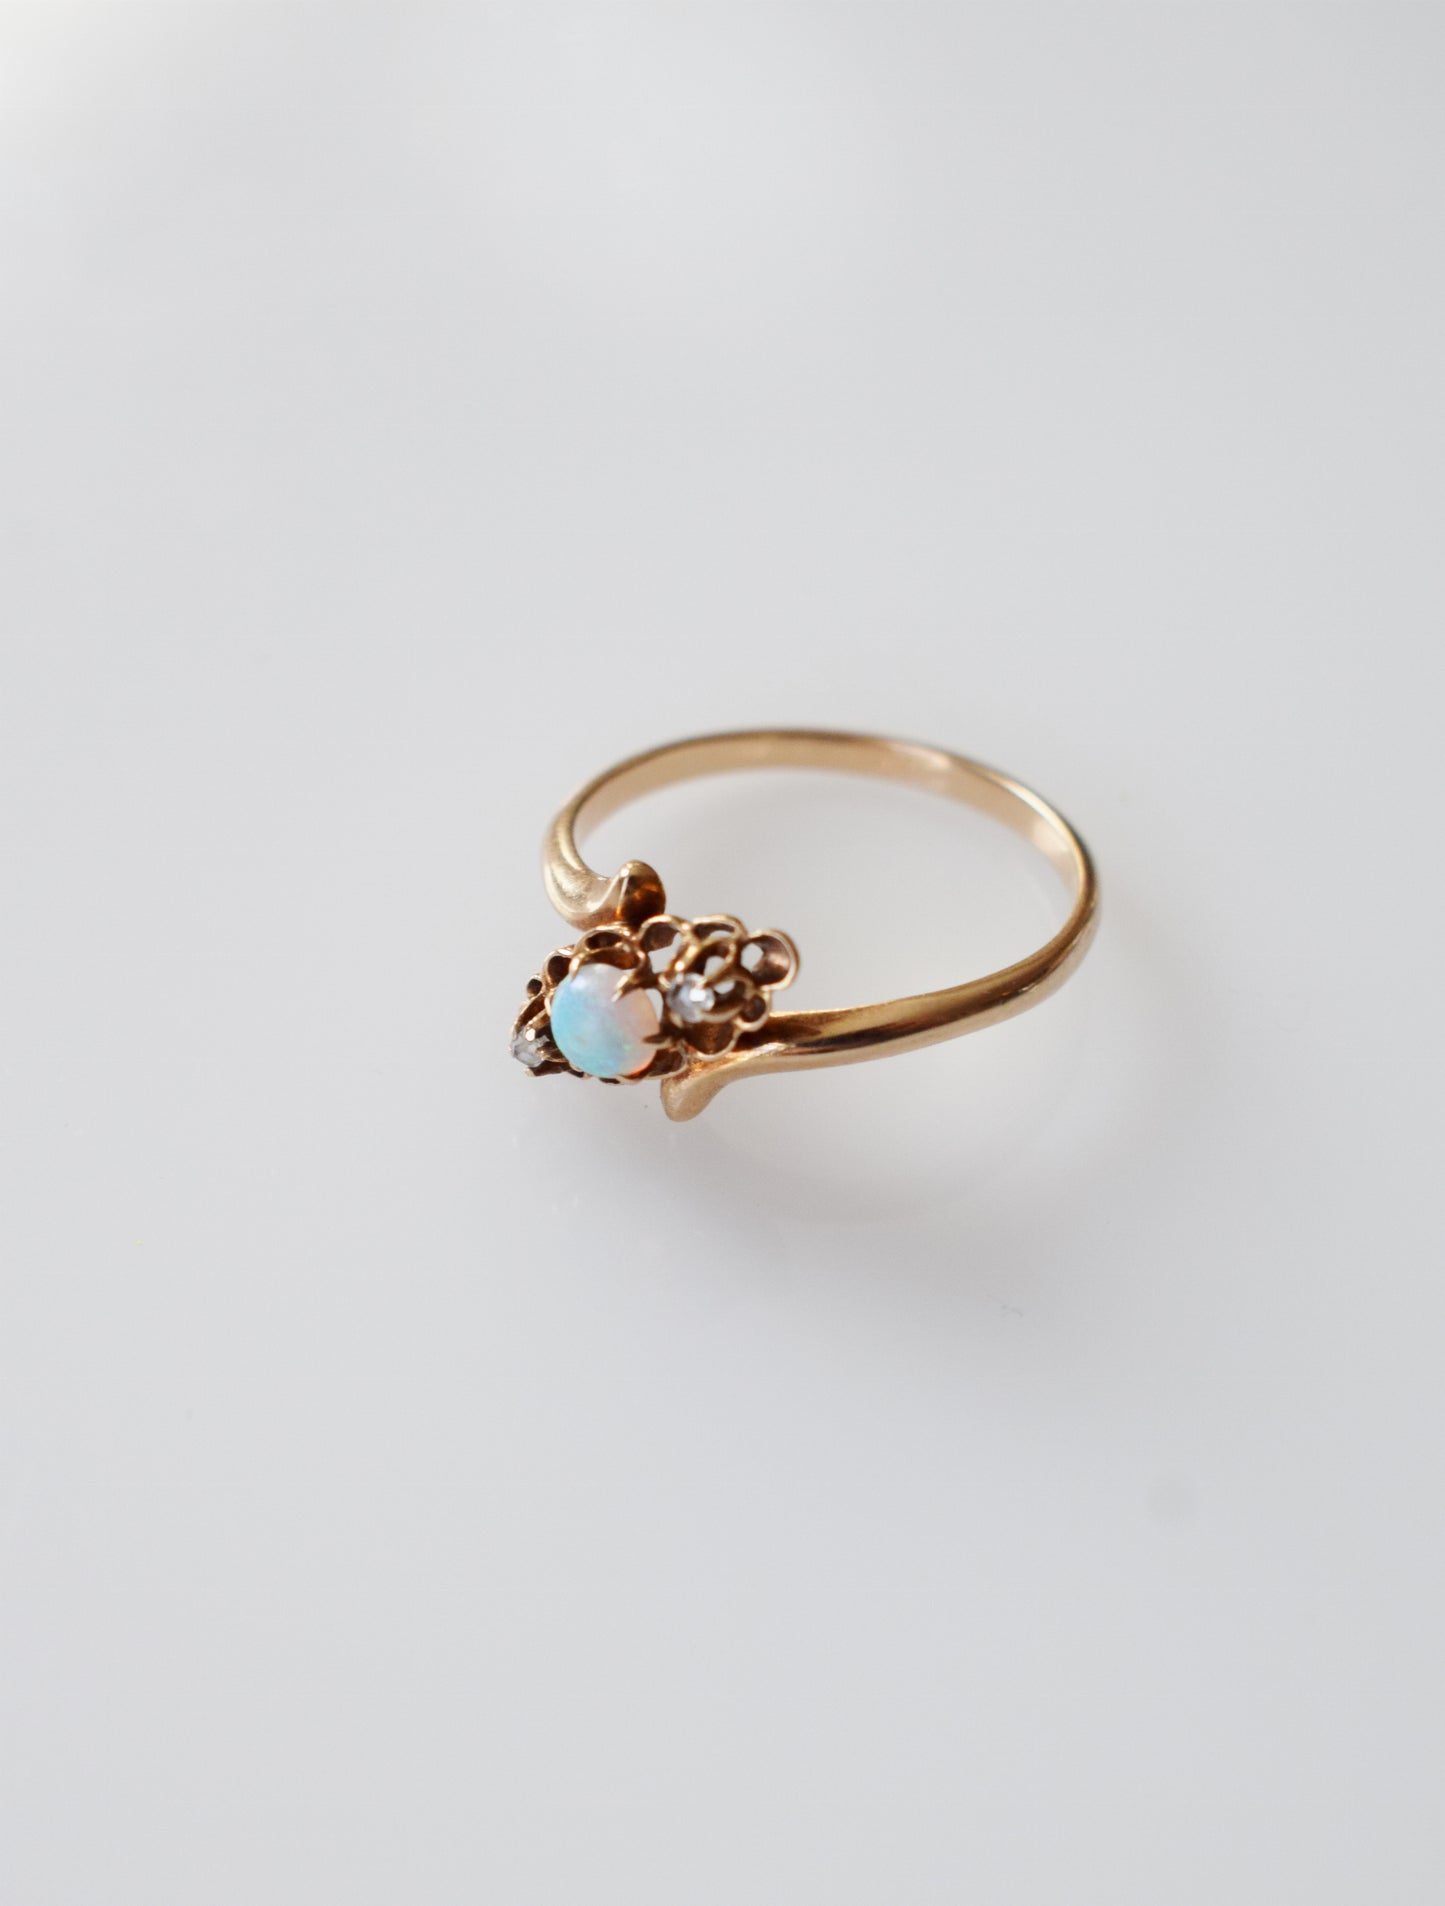 Antique 12kt Gold Opal and Diamond Ring by Allsopp Bros.